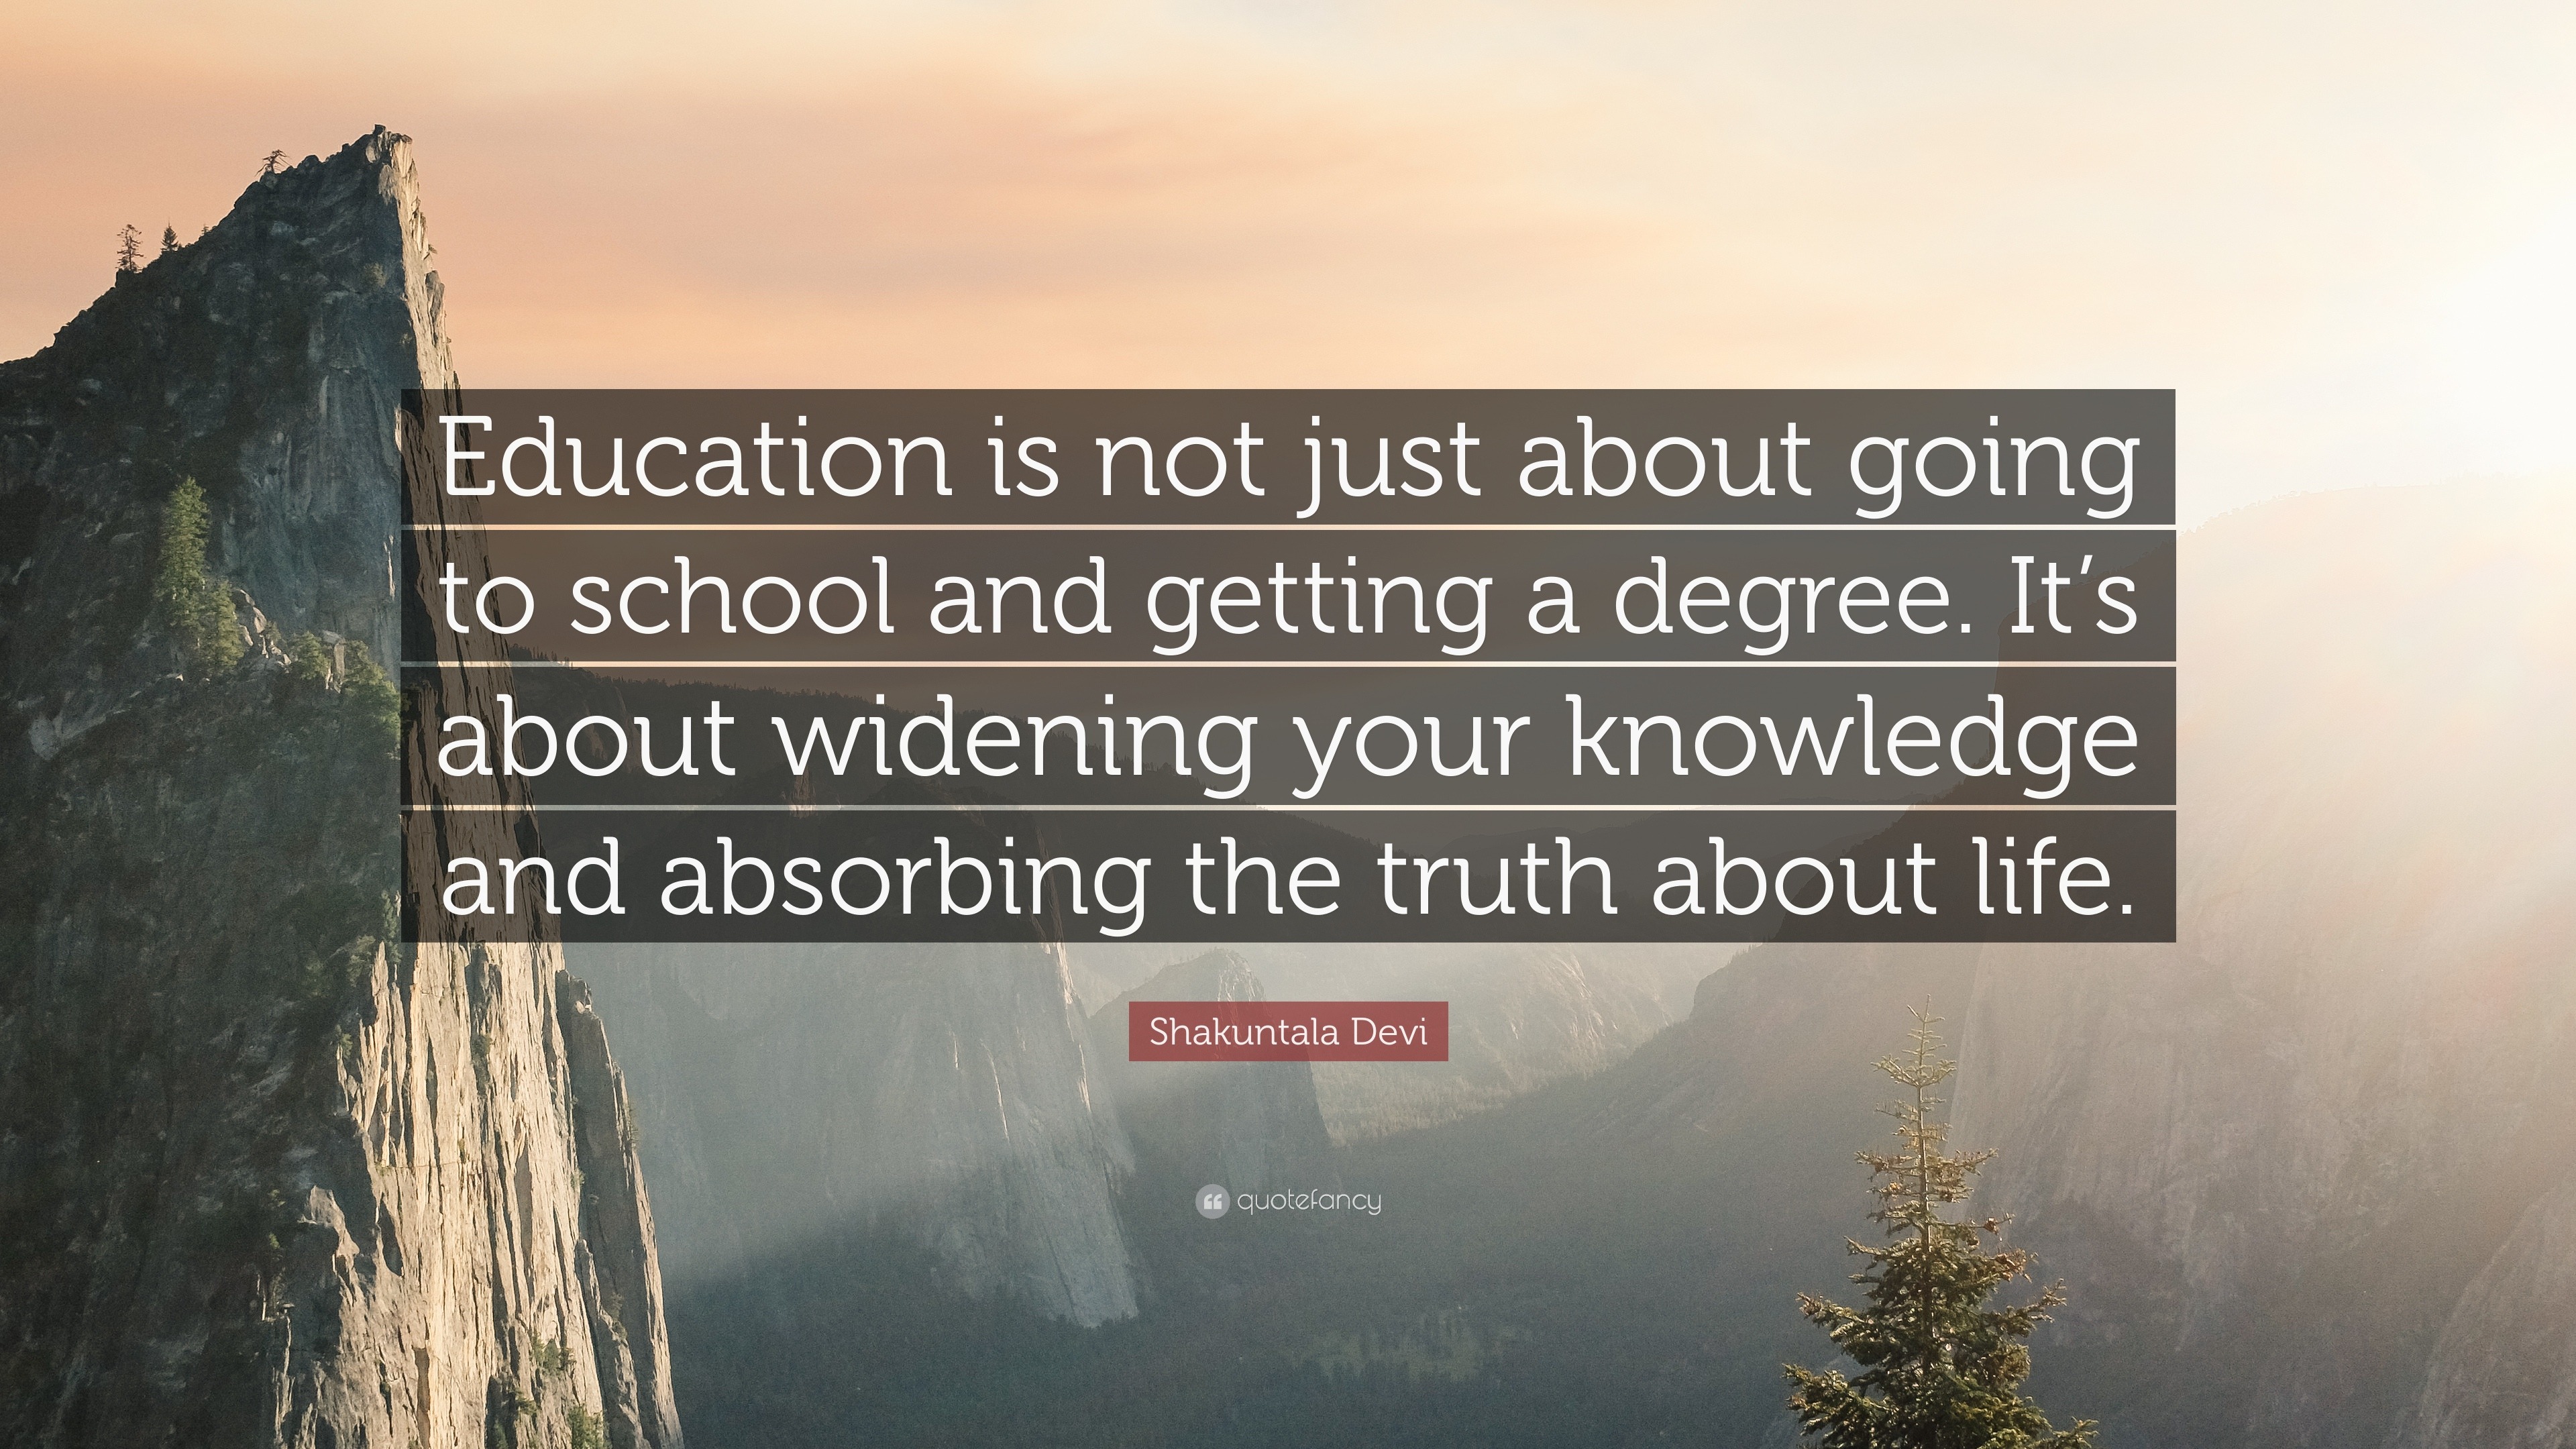 Shakuntala Devi Quote: "Education is not just about going ...